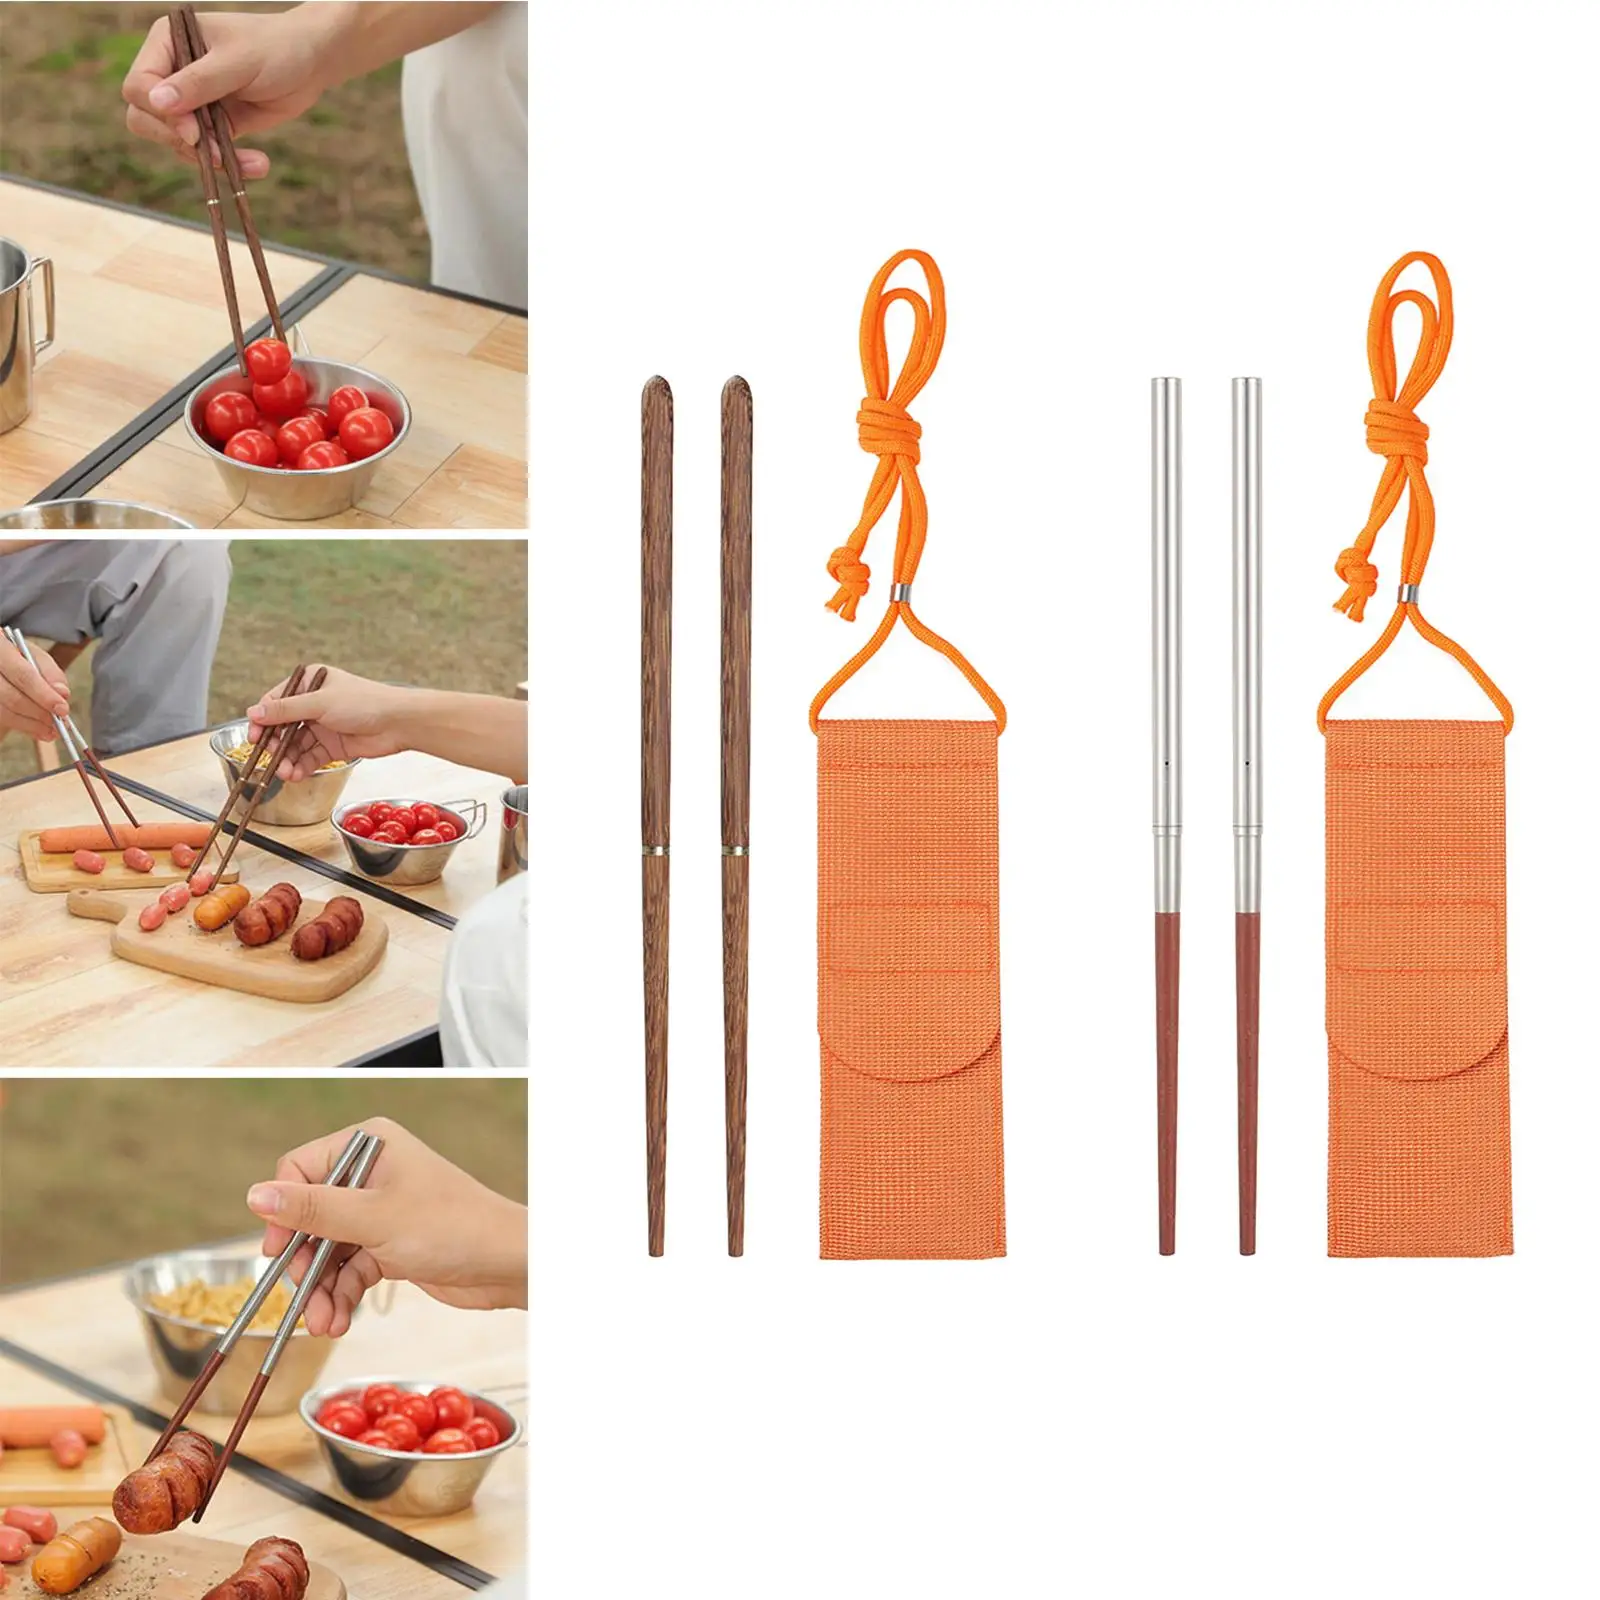 Stainless steel  Chopsticks Screw in/ Apart Reusable Travel Foldable Chopsticks with Pouch